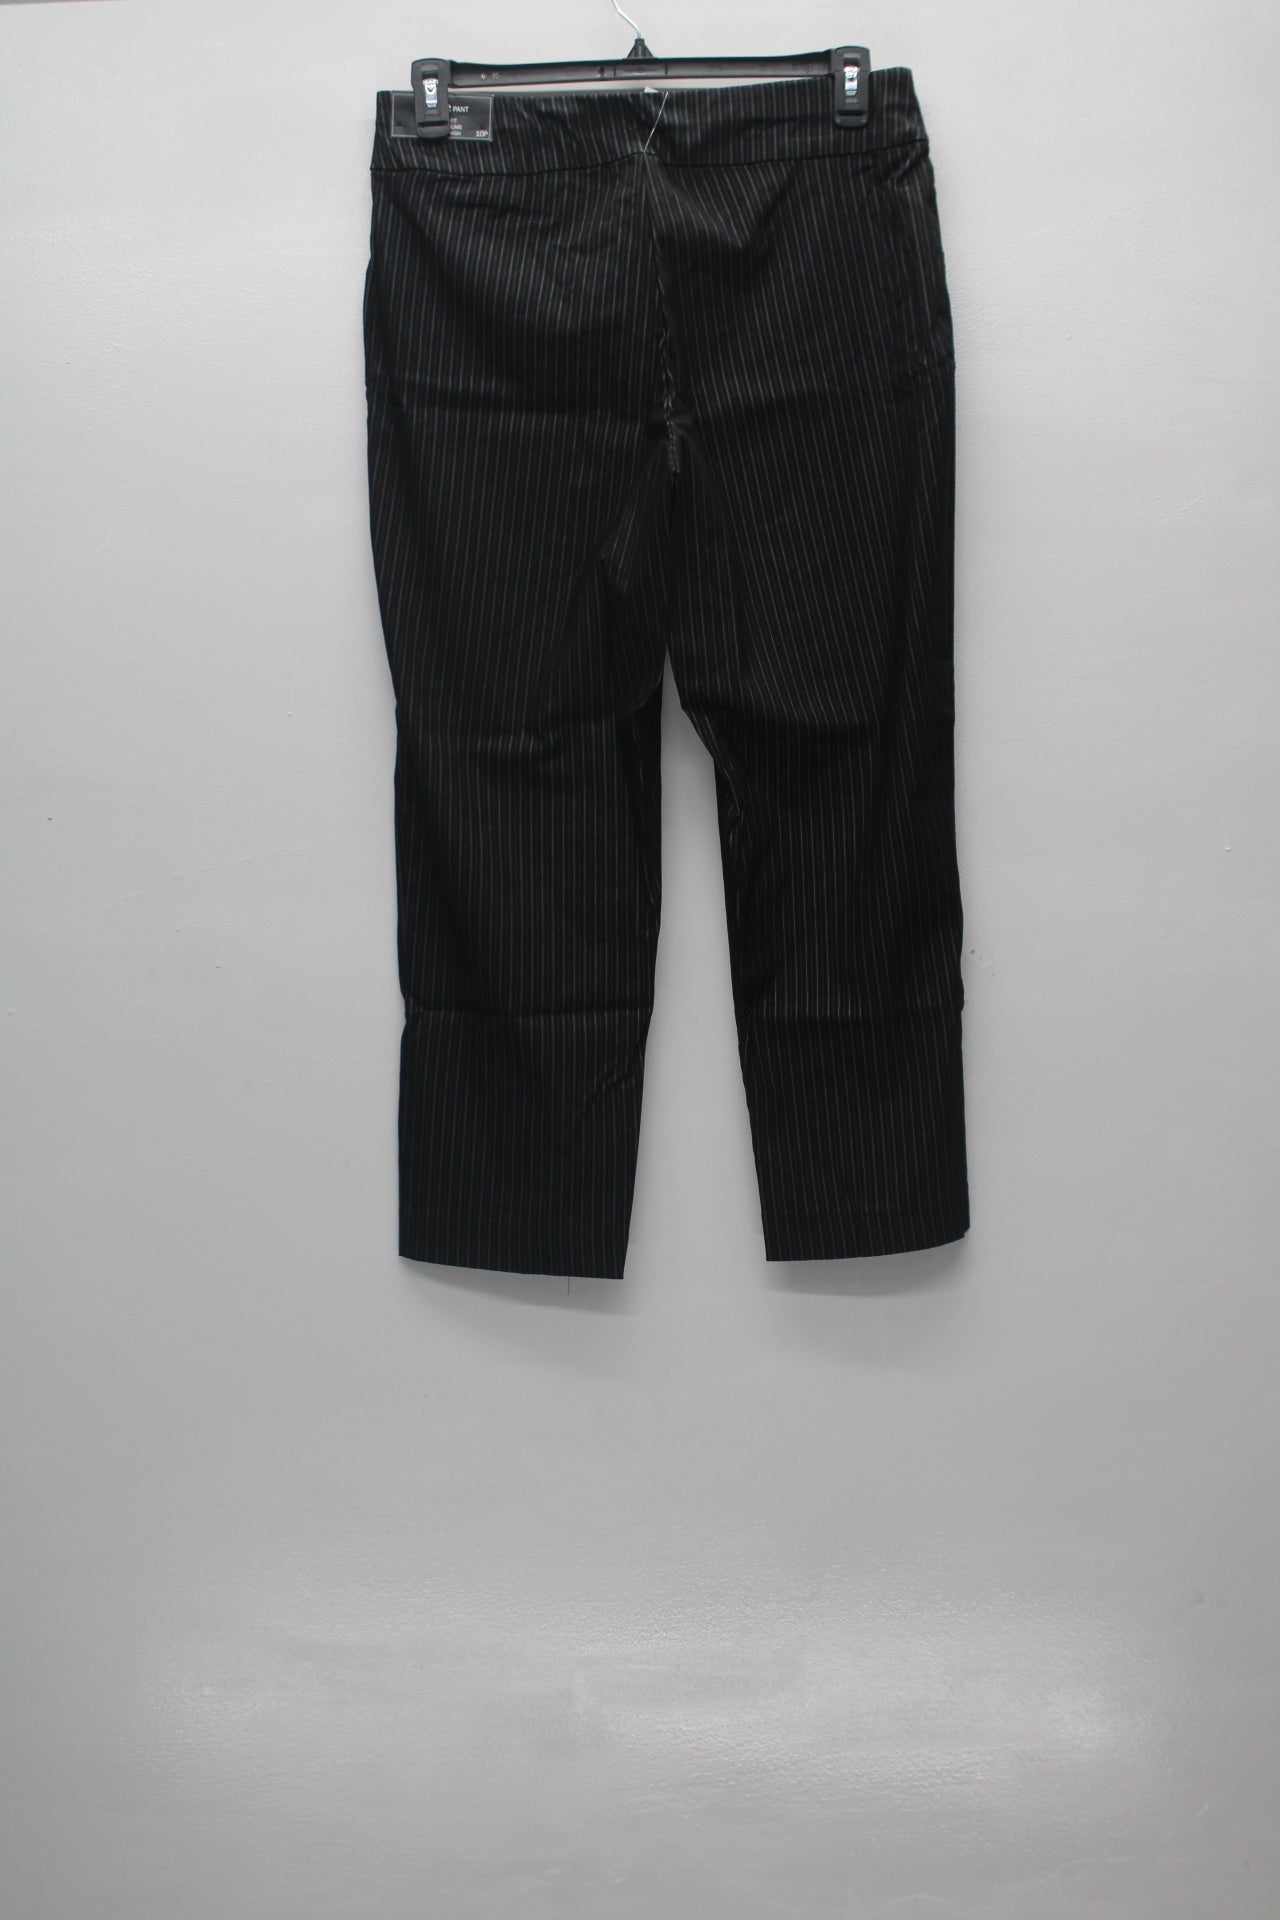 Alfred Dunner Petite Theater District Pinstripe Pants Black 10P